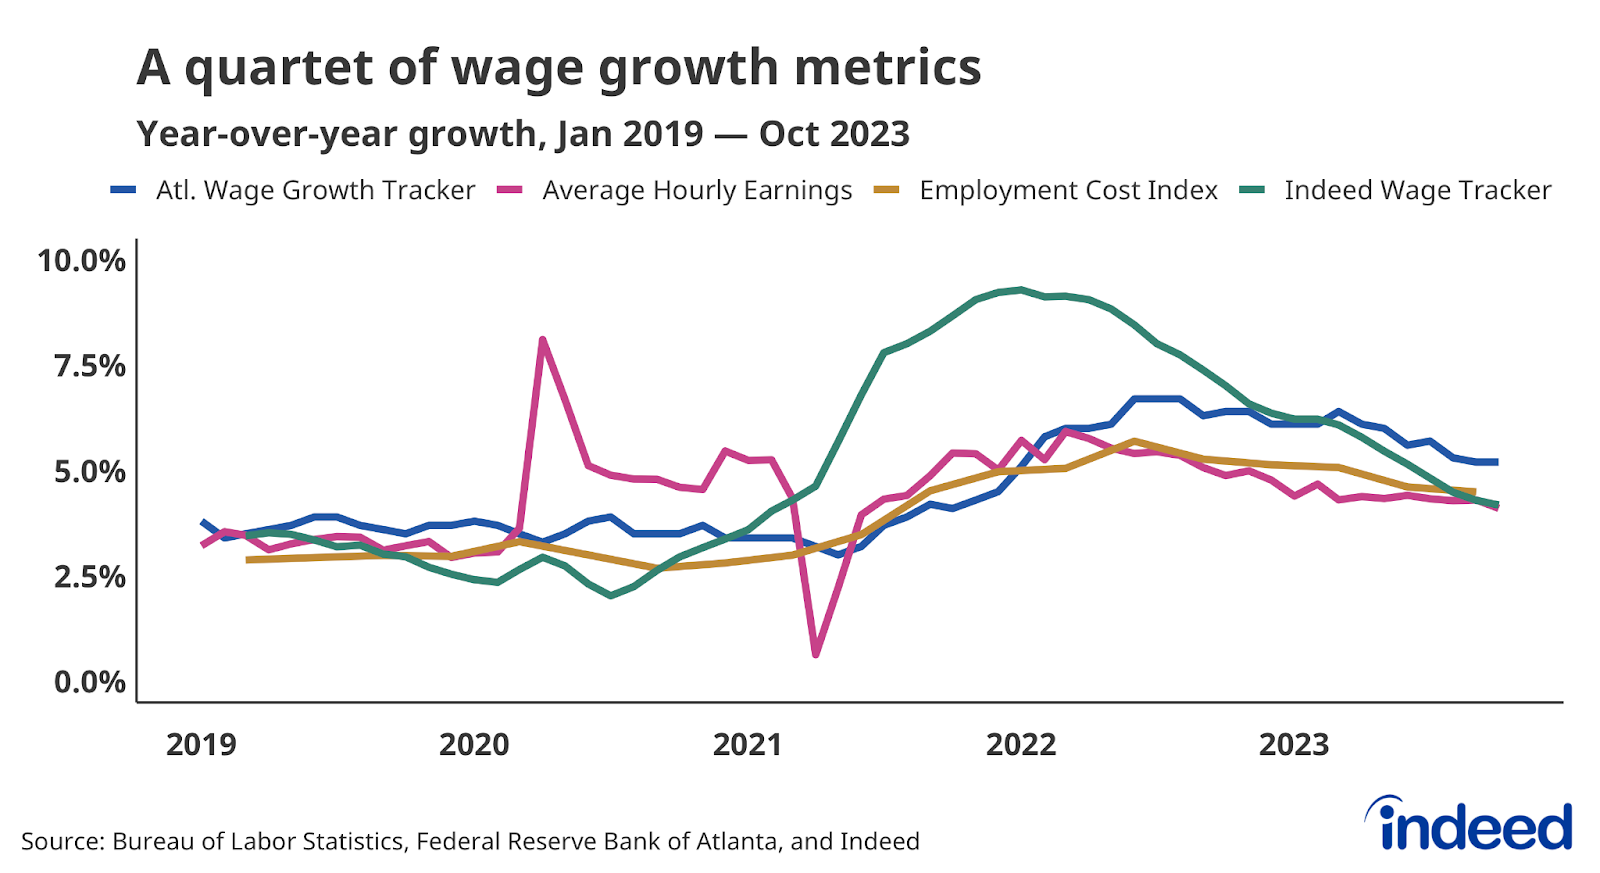 A line graph titled “A quartet of wage growth metrics” shows year-over-year wage growth for four measures of wage growth. All four measures show wage growth moderating in 2023.